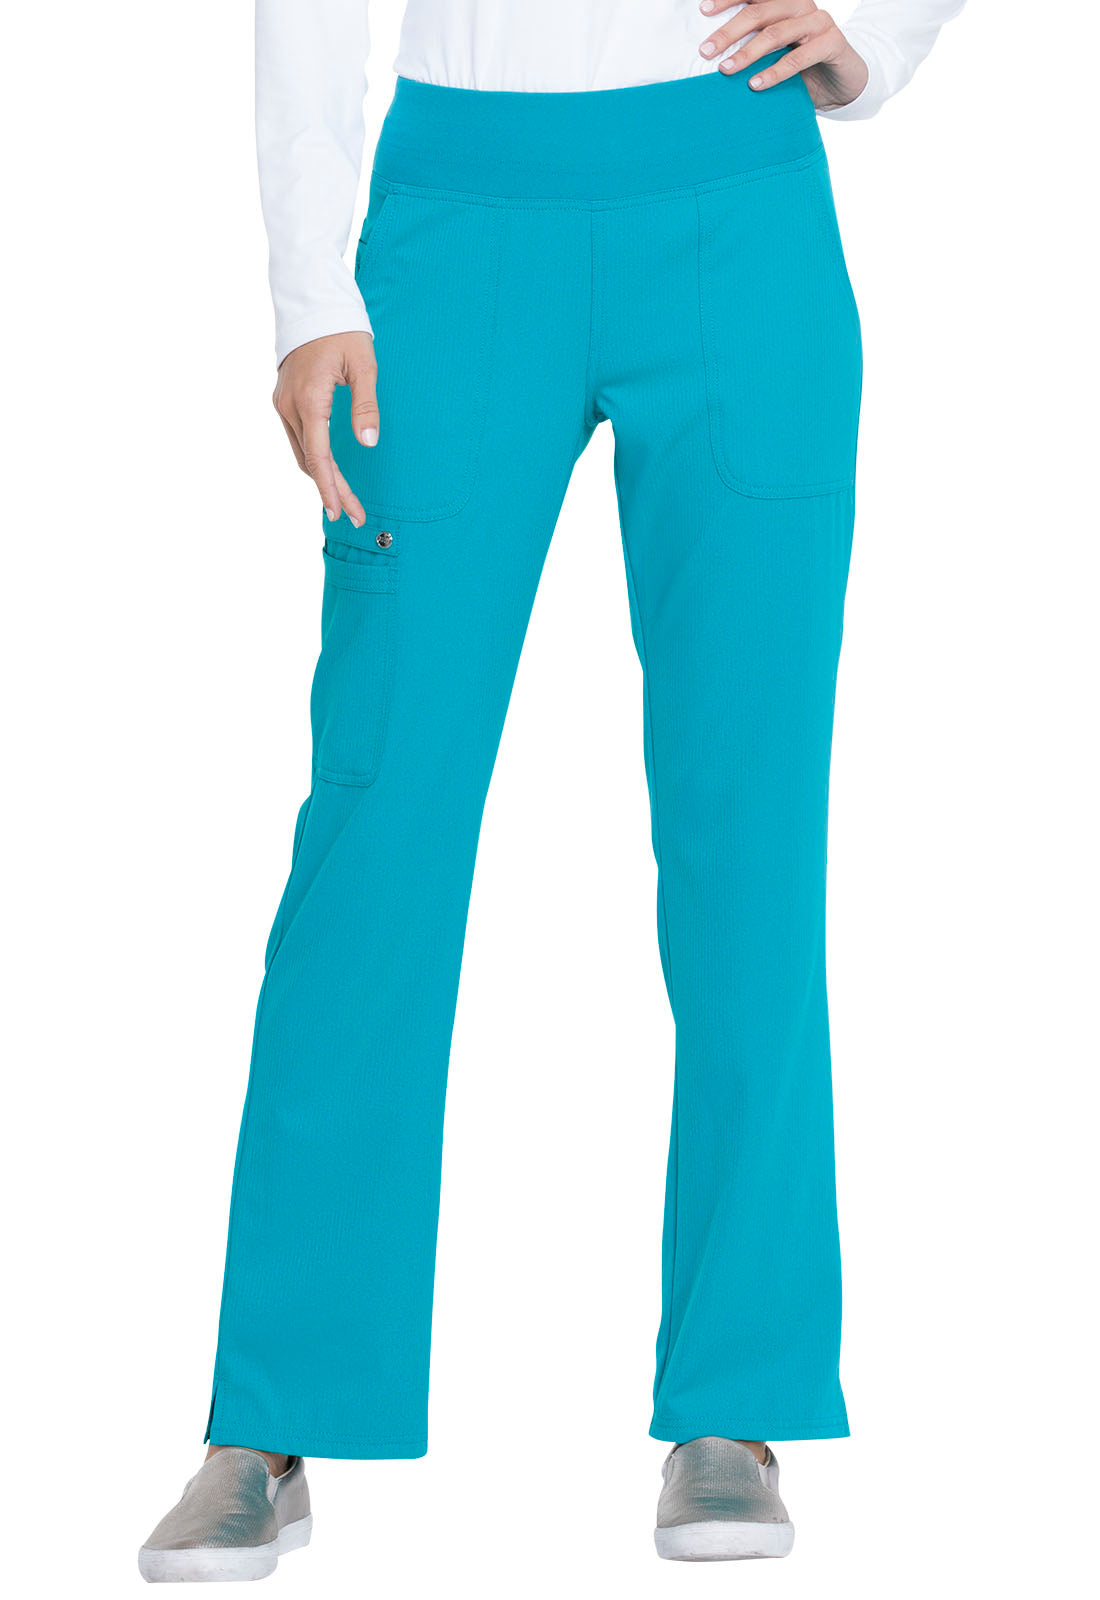 Elle Simply Polished Mid Rise Straight Leg Pull-on Pant in Teal